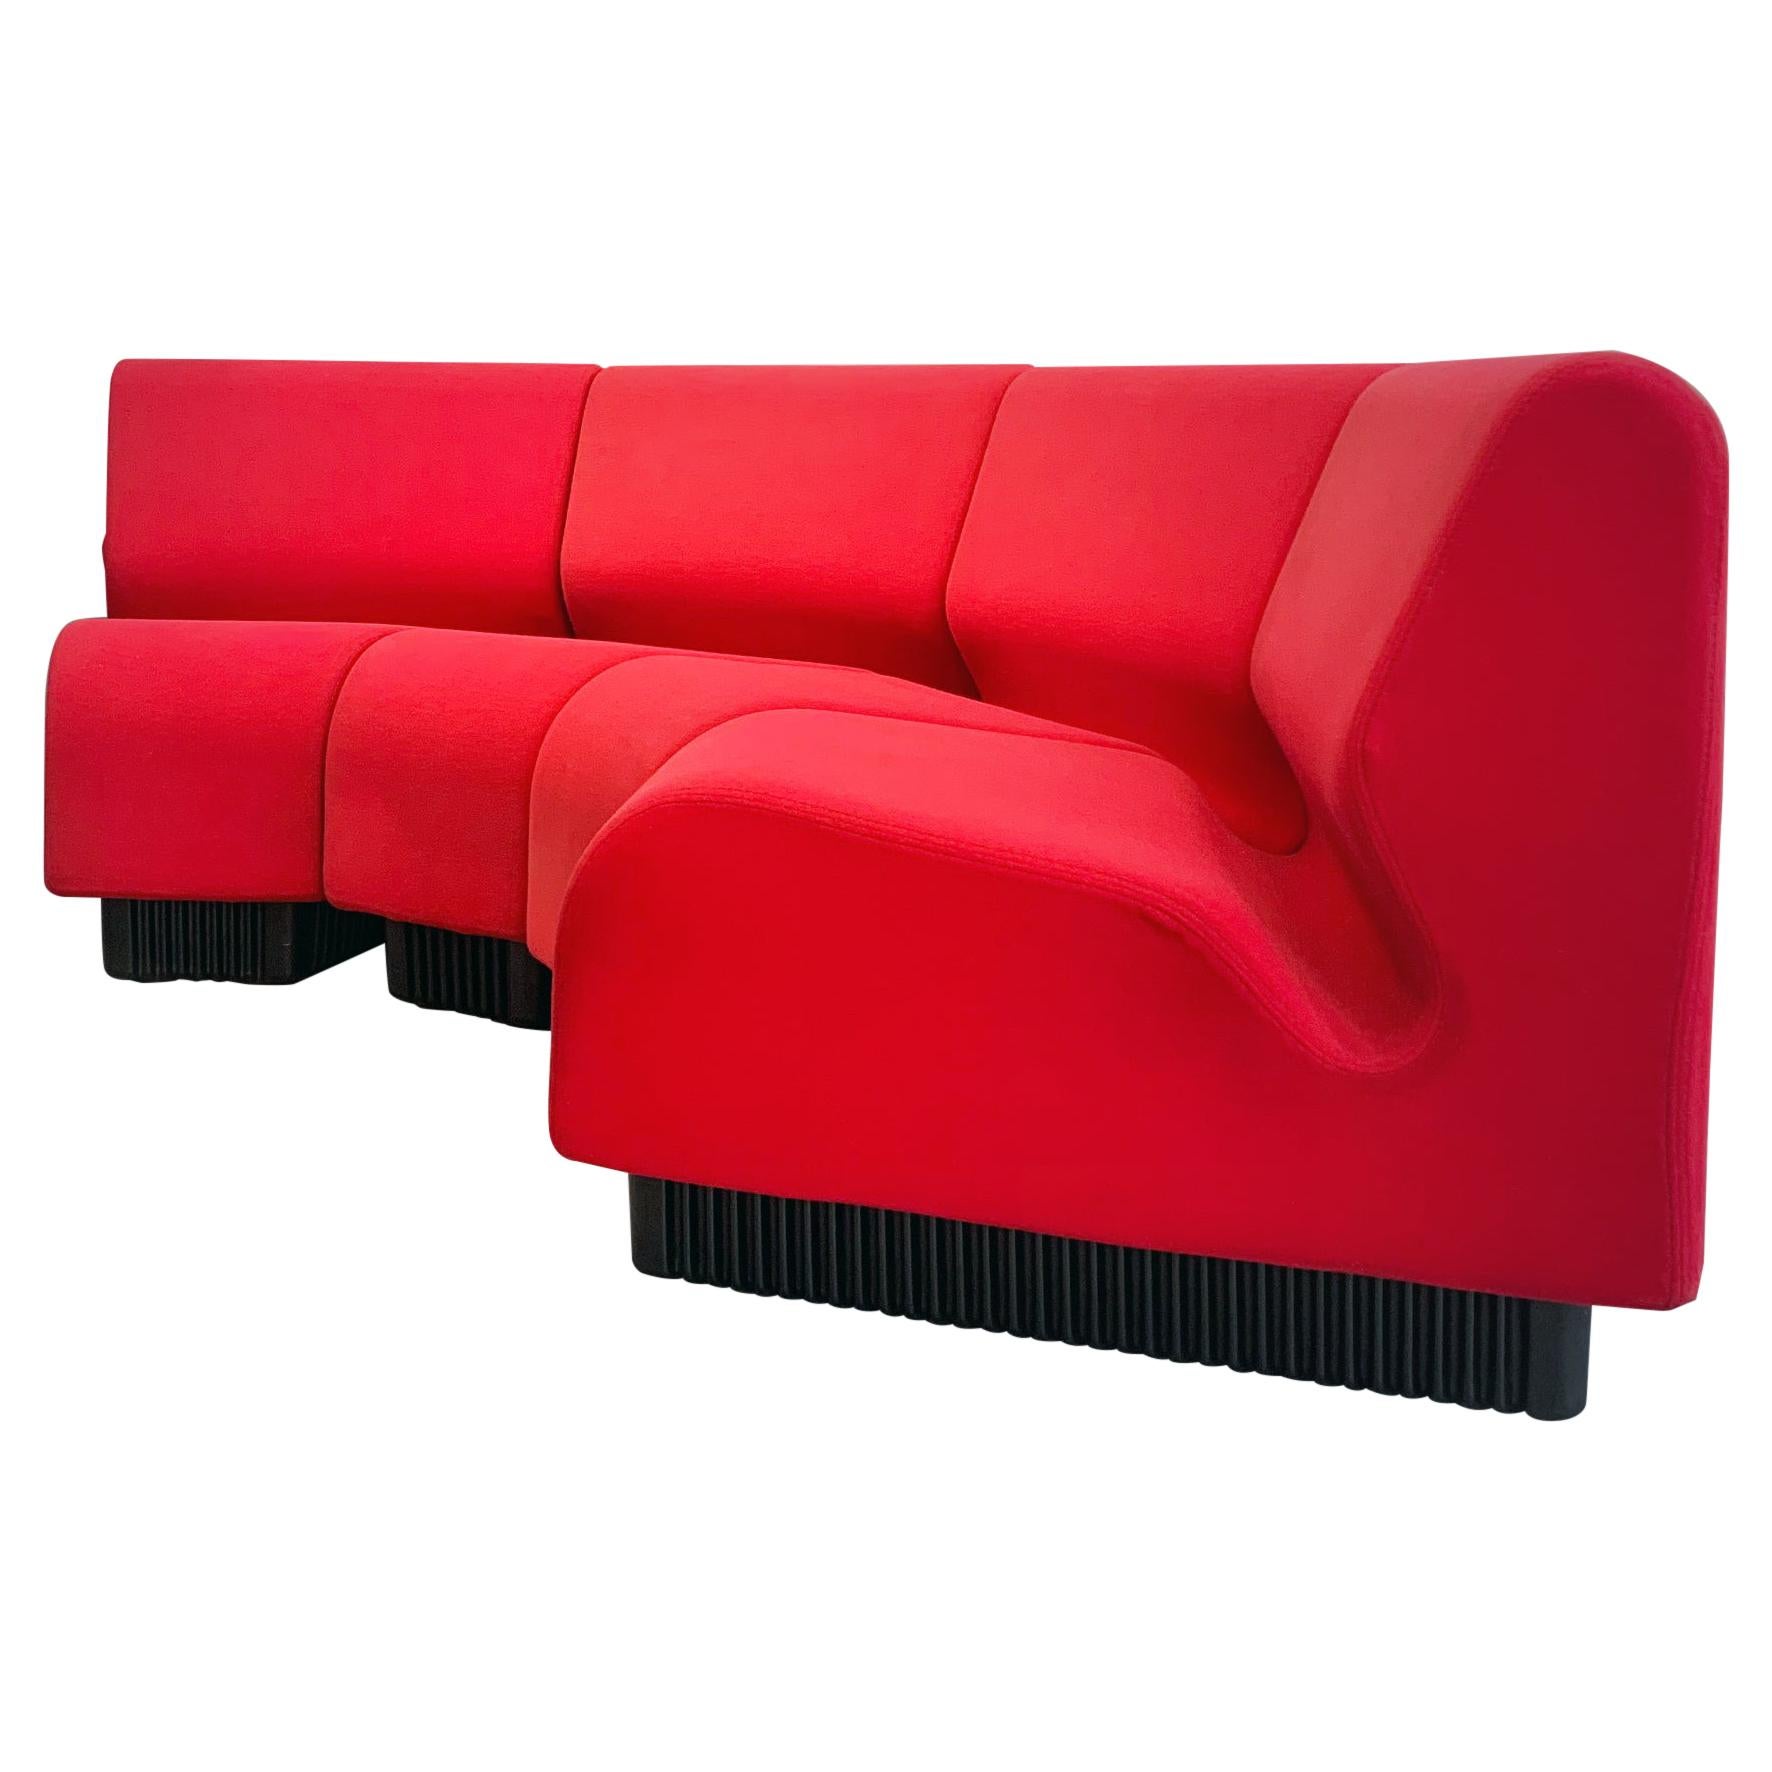 Don Chadwick Modular Sofa Elements Easy Chairs Herman Miller Bright Red Fabric 